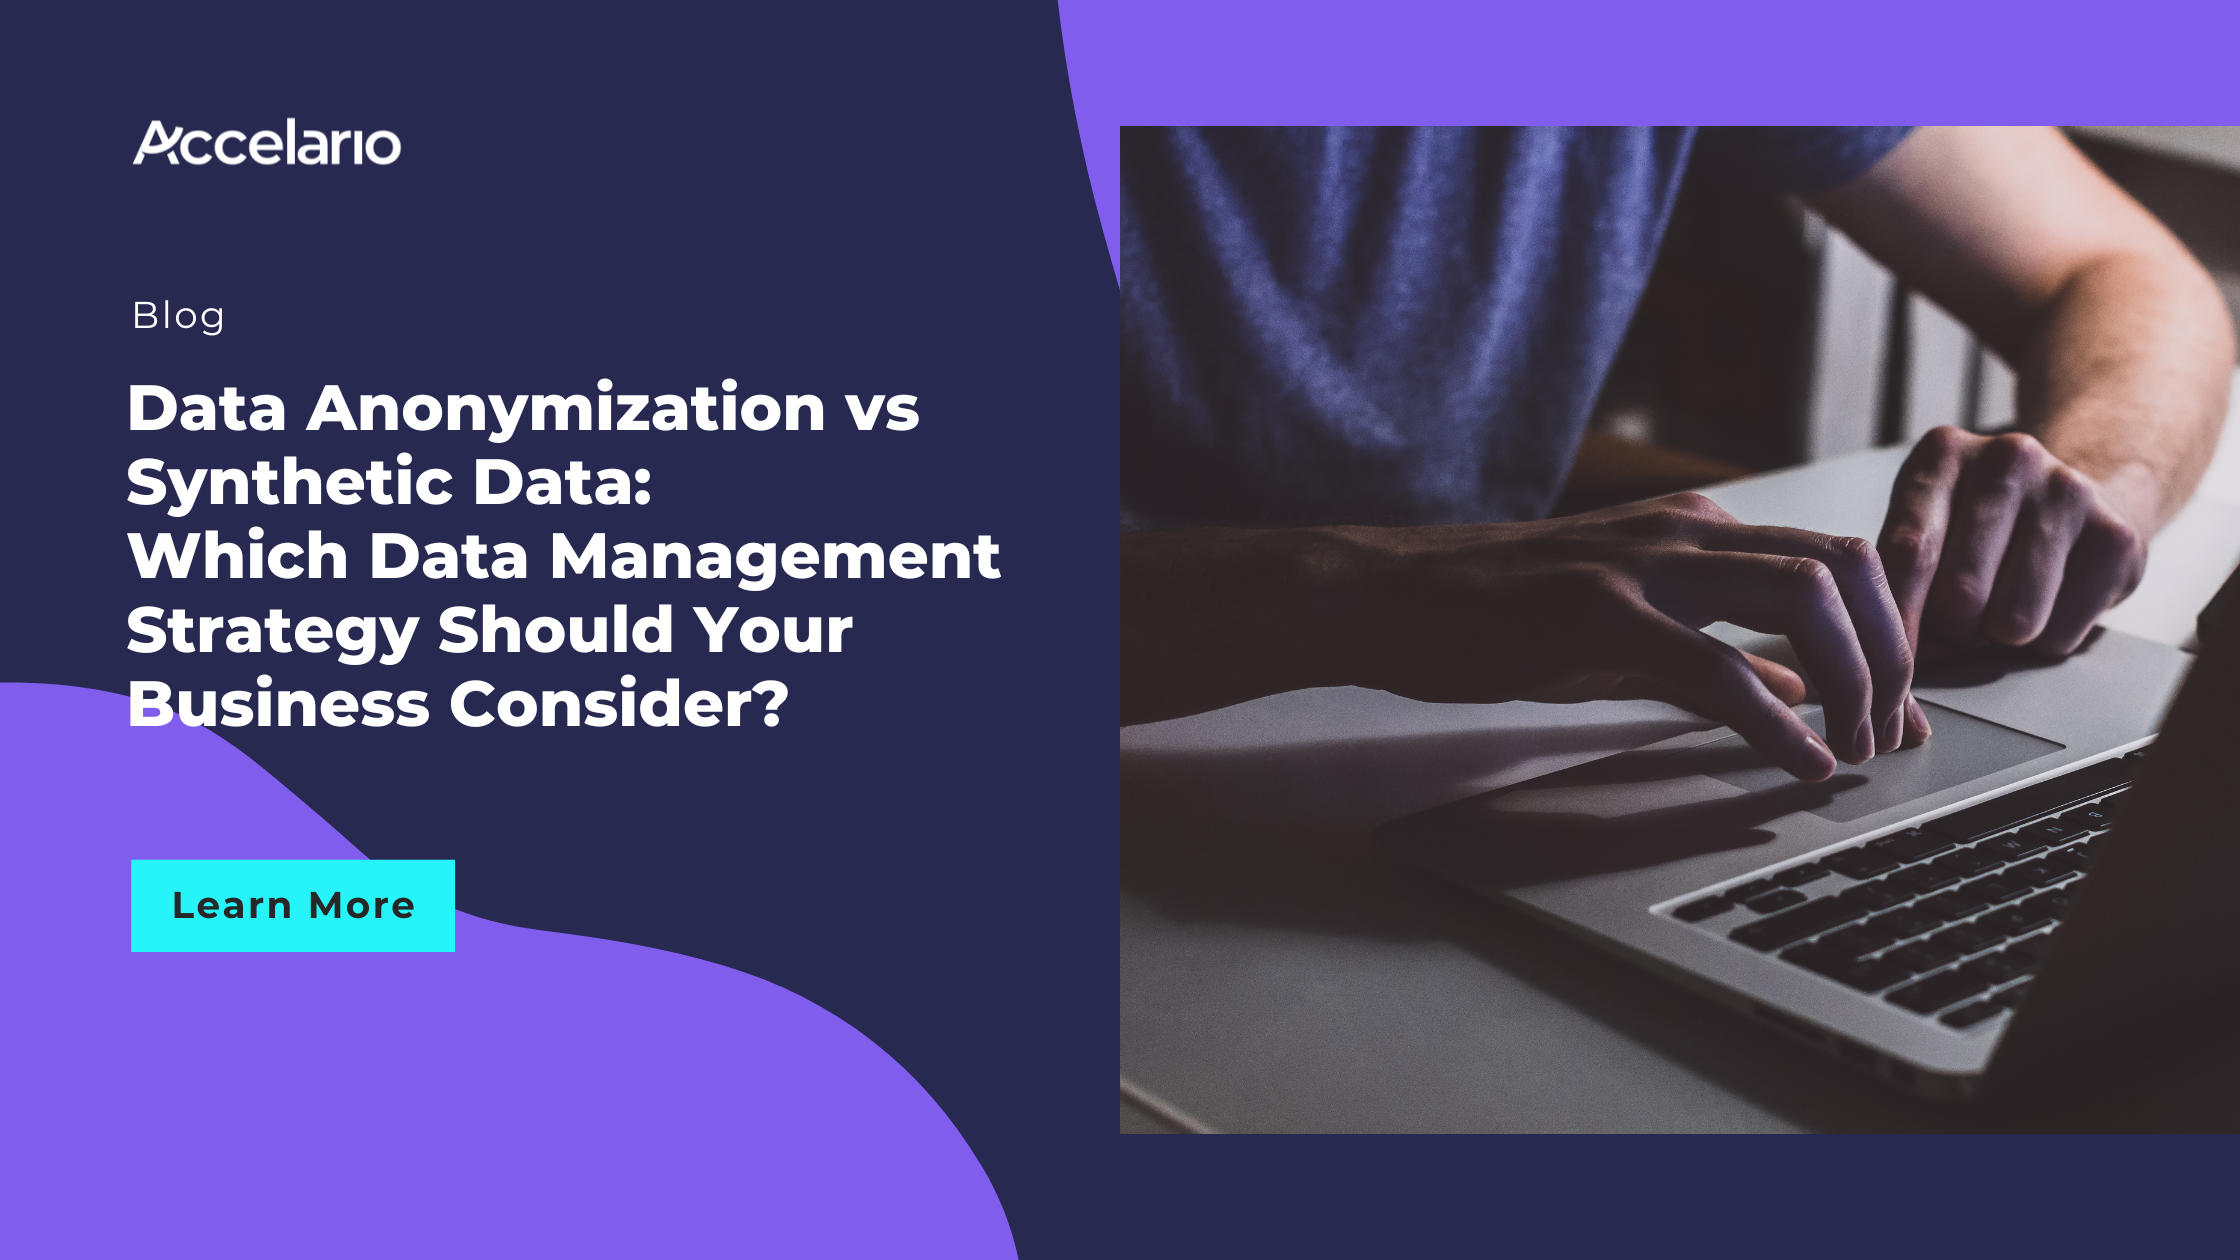 Data Anonymization vs Synthetic Data: Which Data Management Strategy Should Your Business Consider?